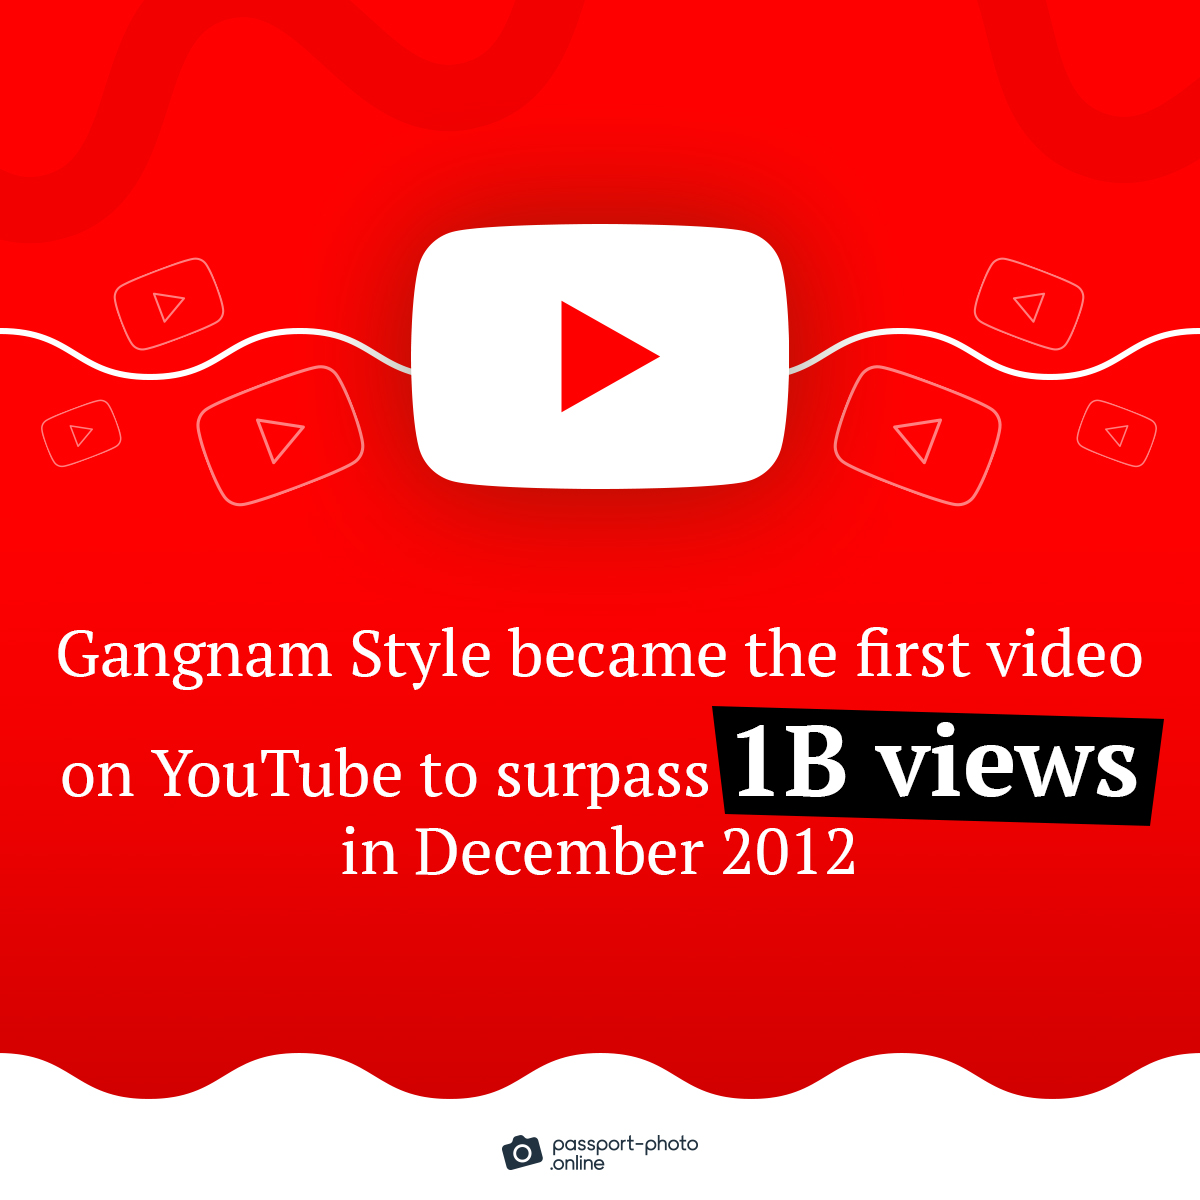 gangnam style became the first video on youtube to surpass 1B views